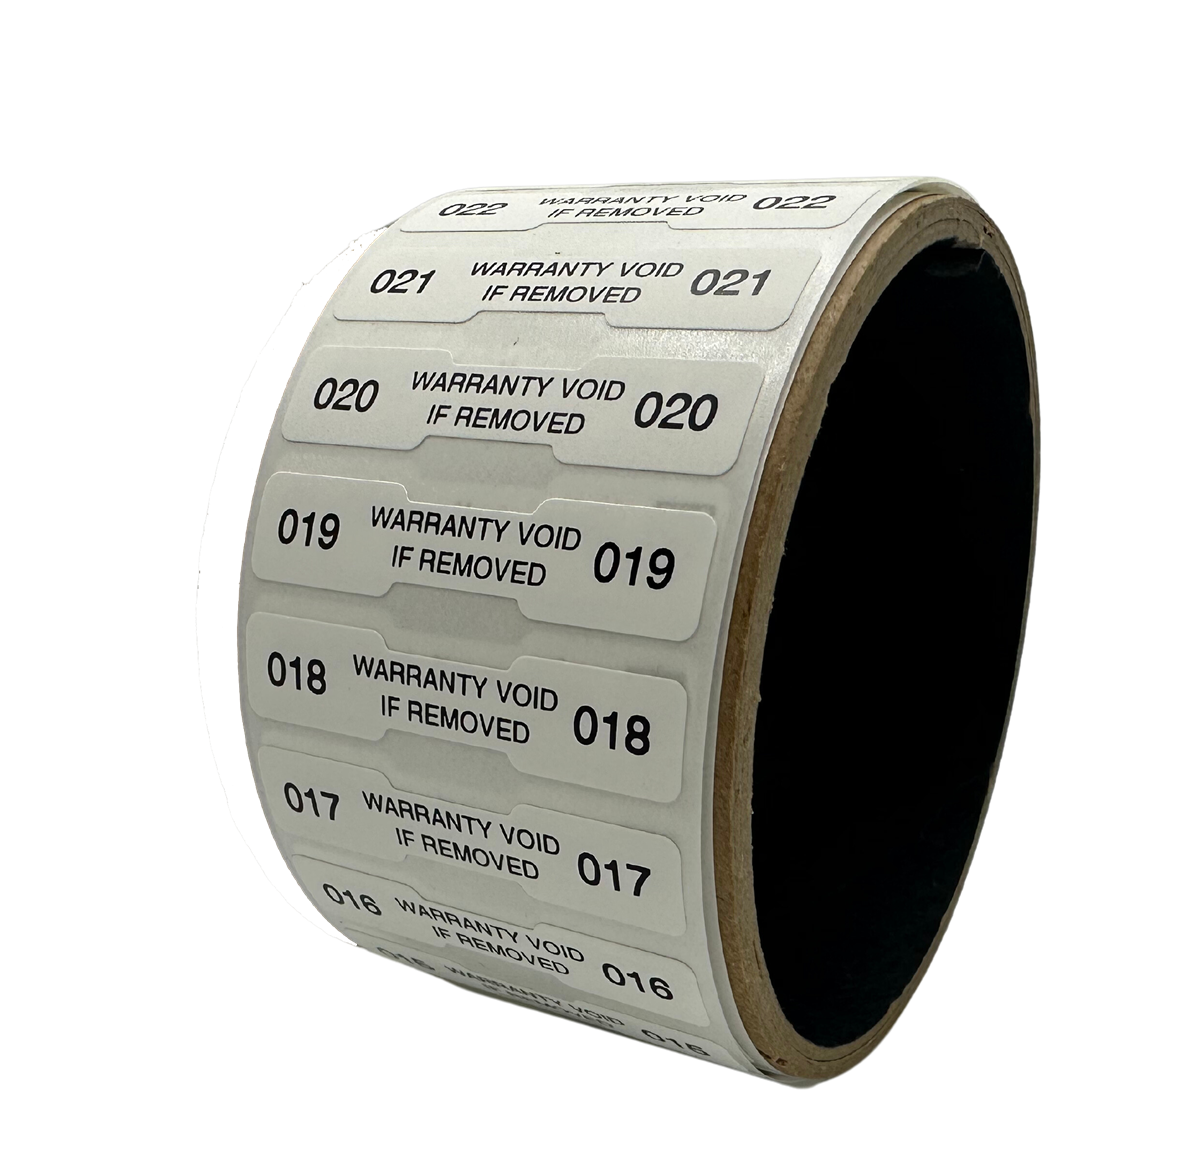 1,000 Tamper Evident White Non Residue Security Labels TamperGuard® Seal Sticker, Dogbone 1.75" x 0.375" (44mm x 9mm). Printed: Warranty Void if Removed + Serialized